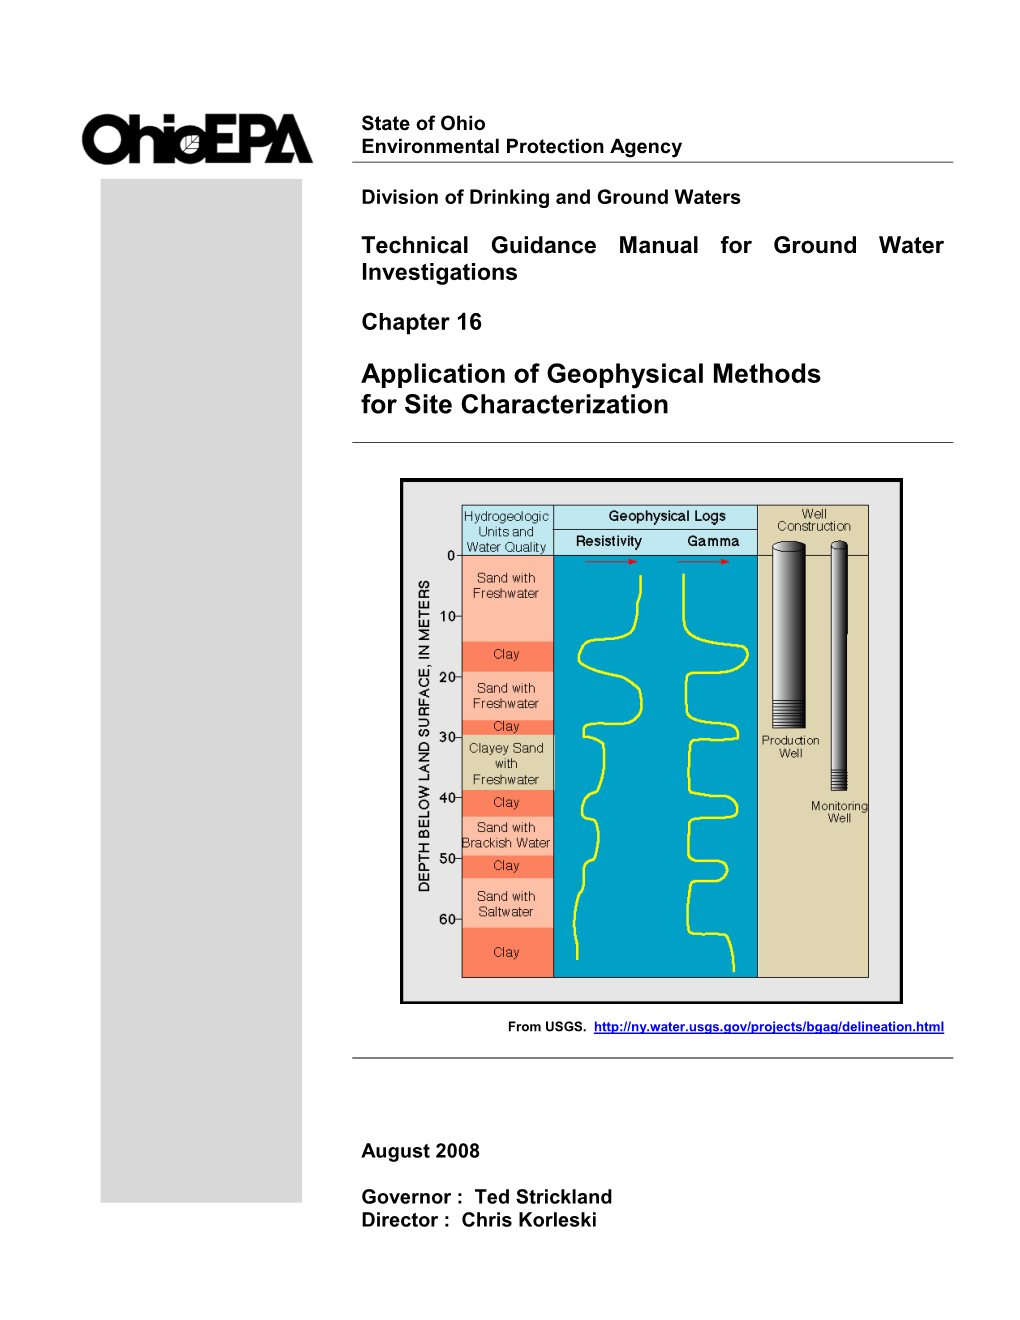 Application of Geophysical Methods for Site Characterization